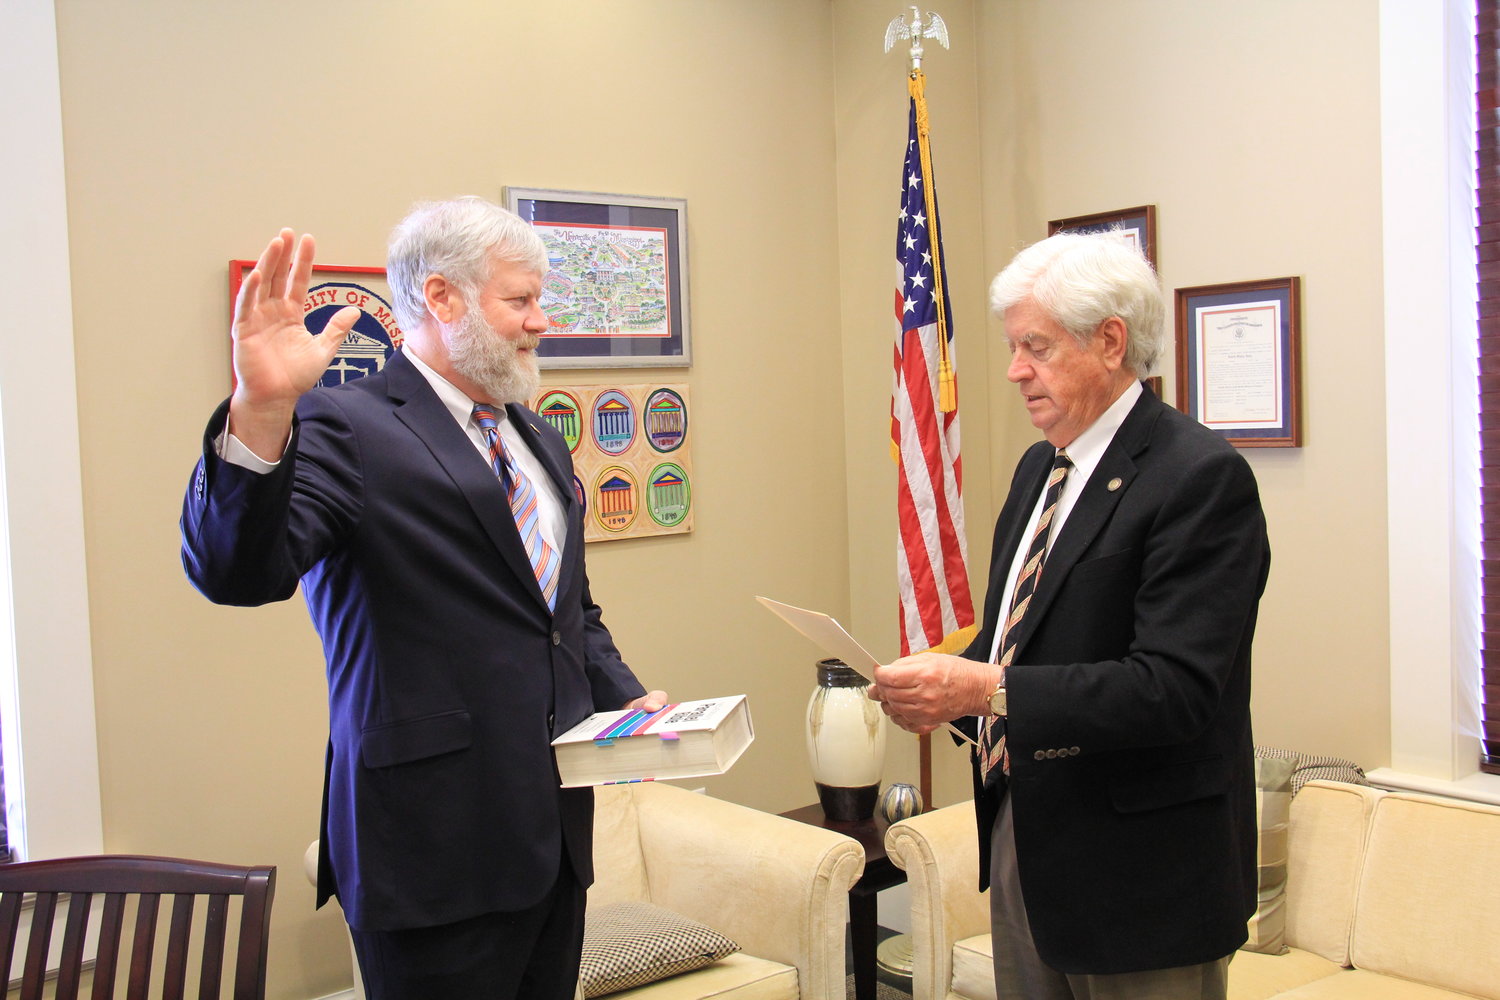 Supreme Court Justice Kenny Griffis, at left, takes the oath of office on Jan. 3. Chief Justice Mike Randolph, at right, administers the oath.